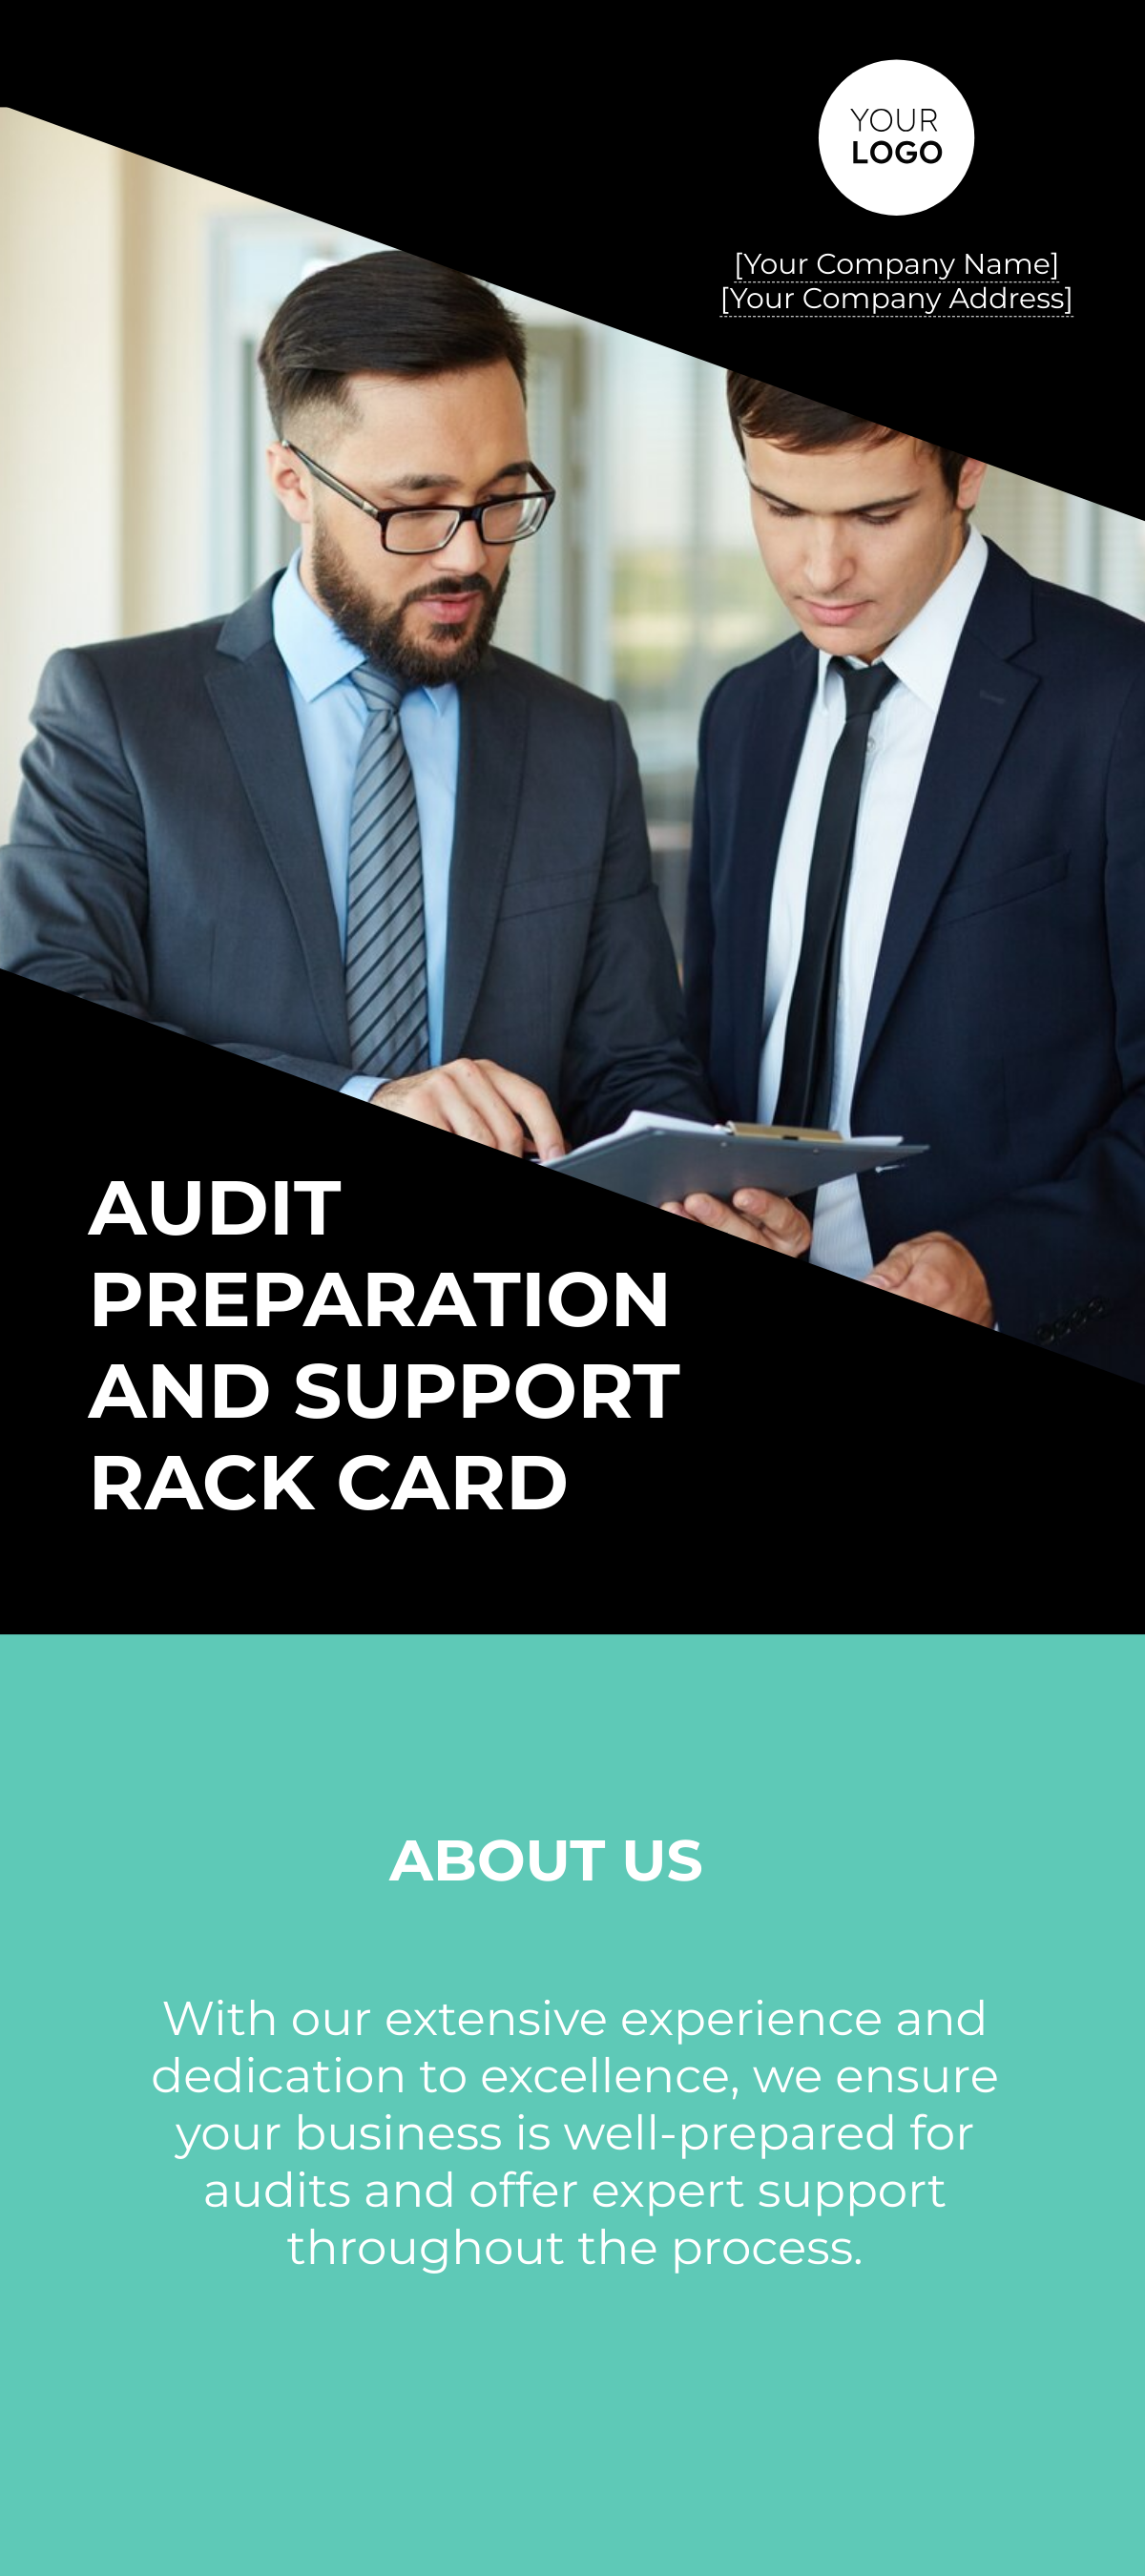 Free Audit Preparation and Support Rack Card Template